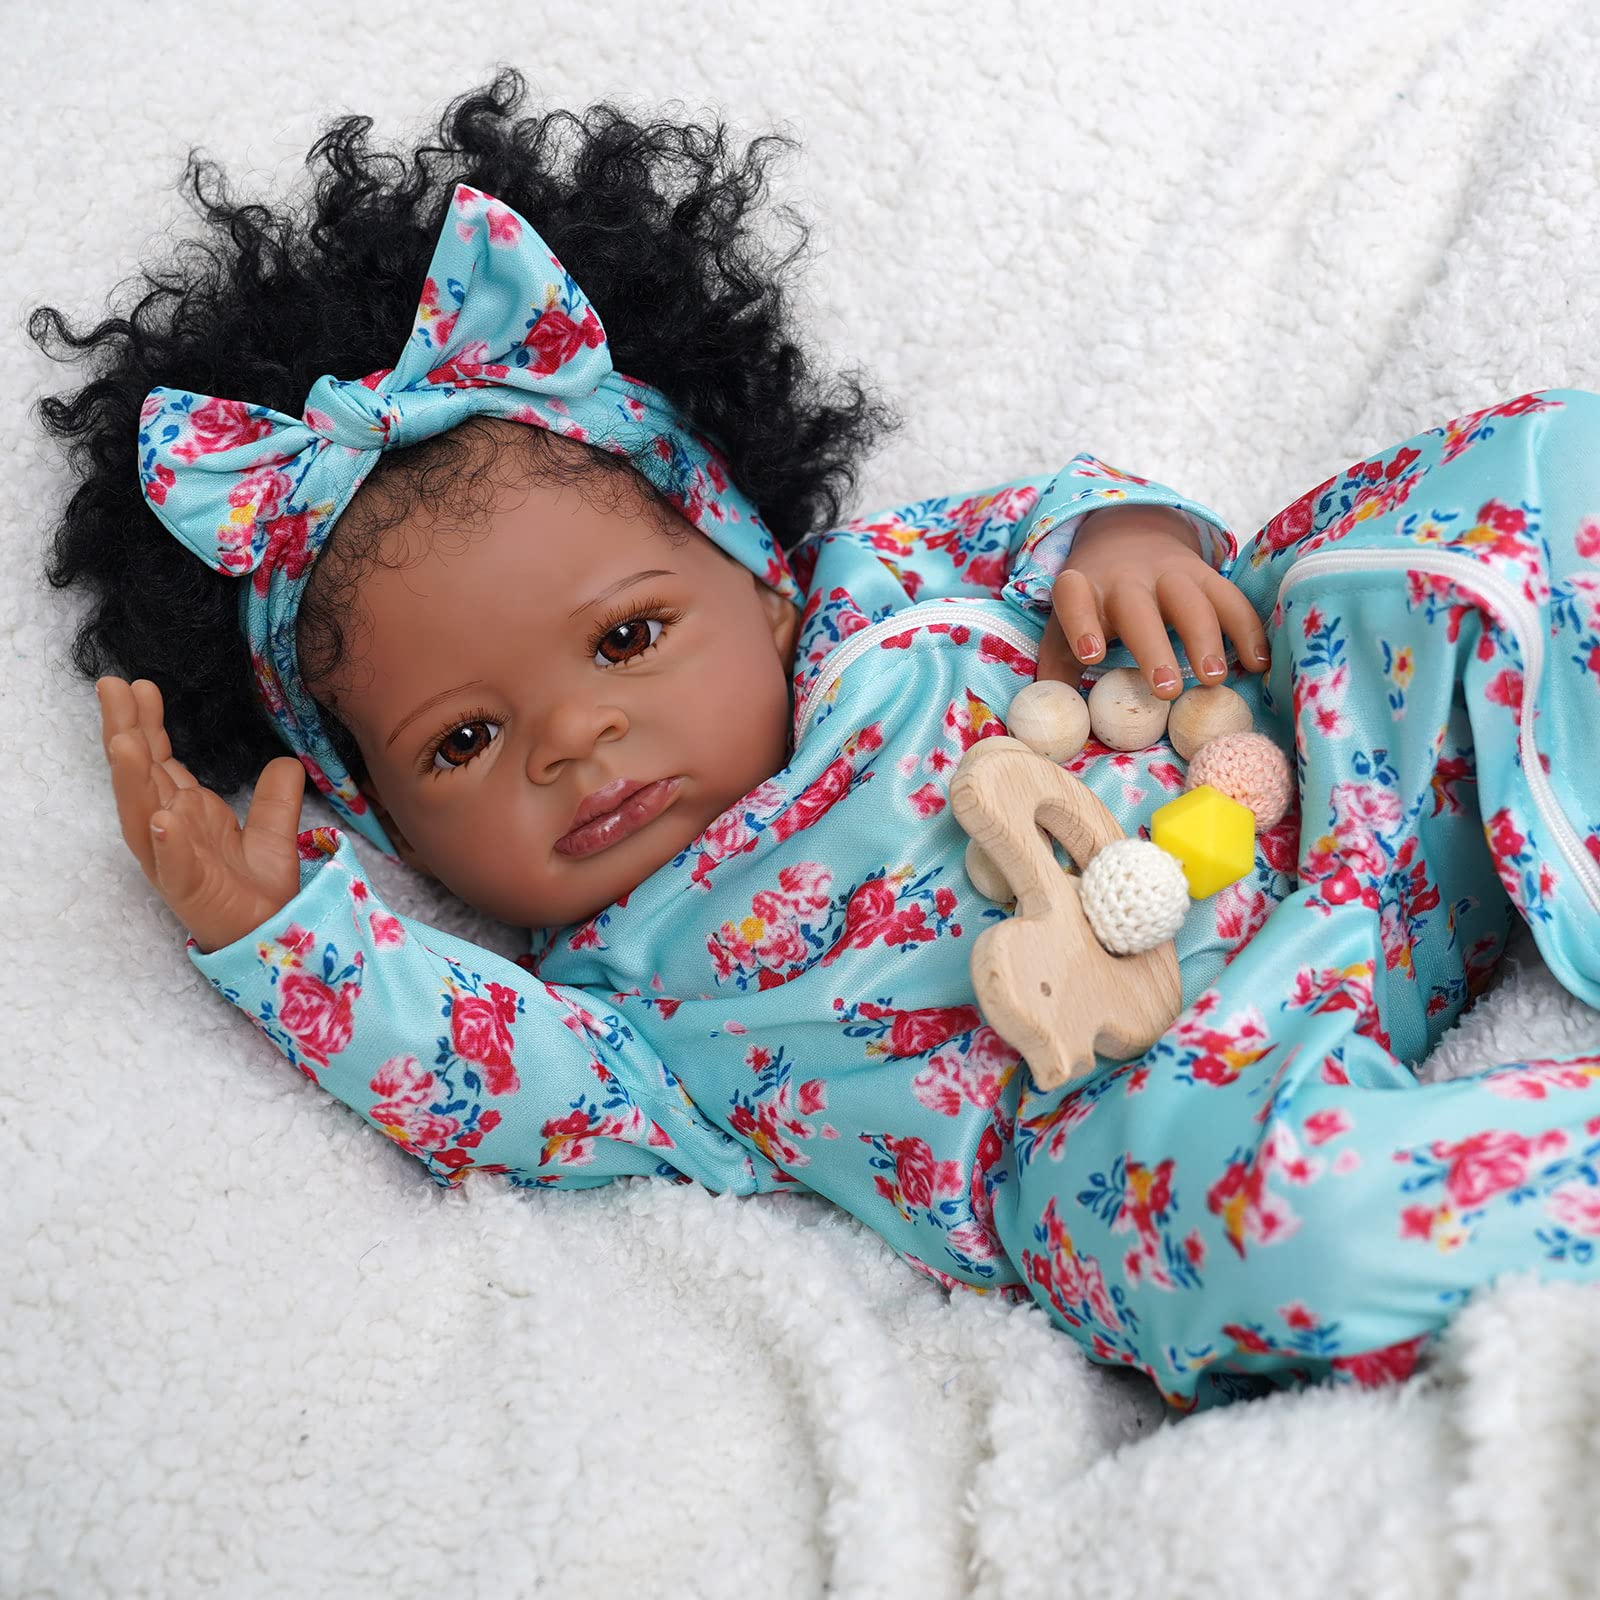 BABESIDE Lifelike Reborn Black Girl- 18-Inch Realistic Newborn Real Life Baby Dolls with Clothes and Toy Gift for Kids Age 3+1